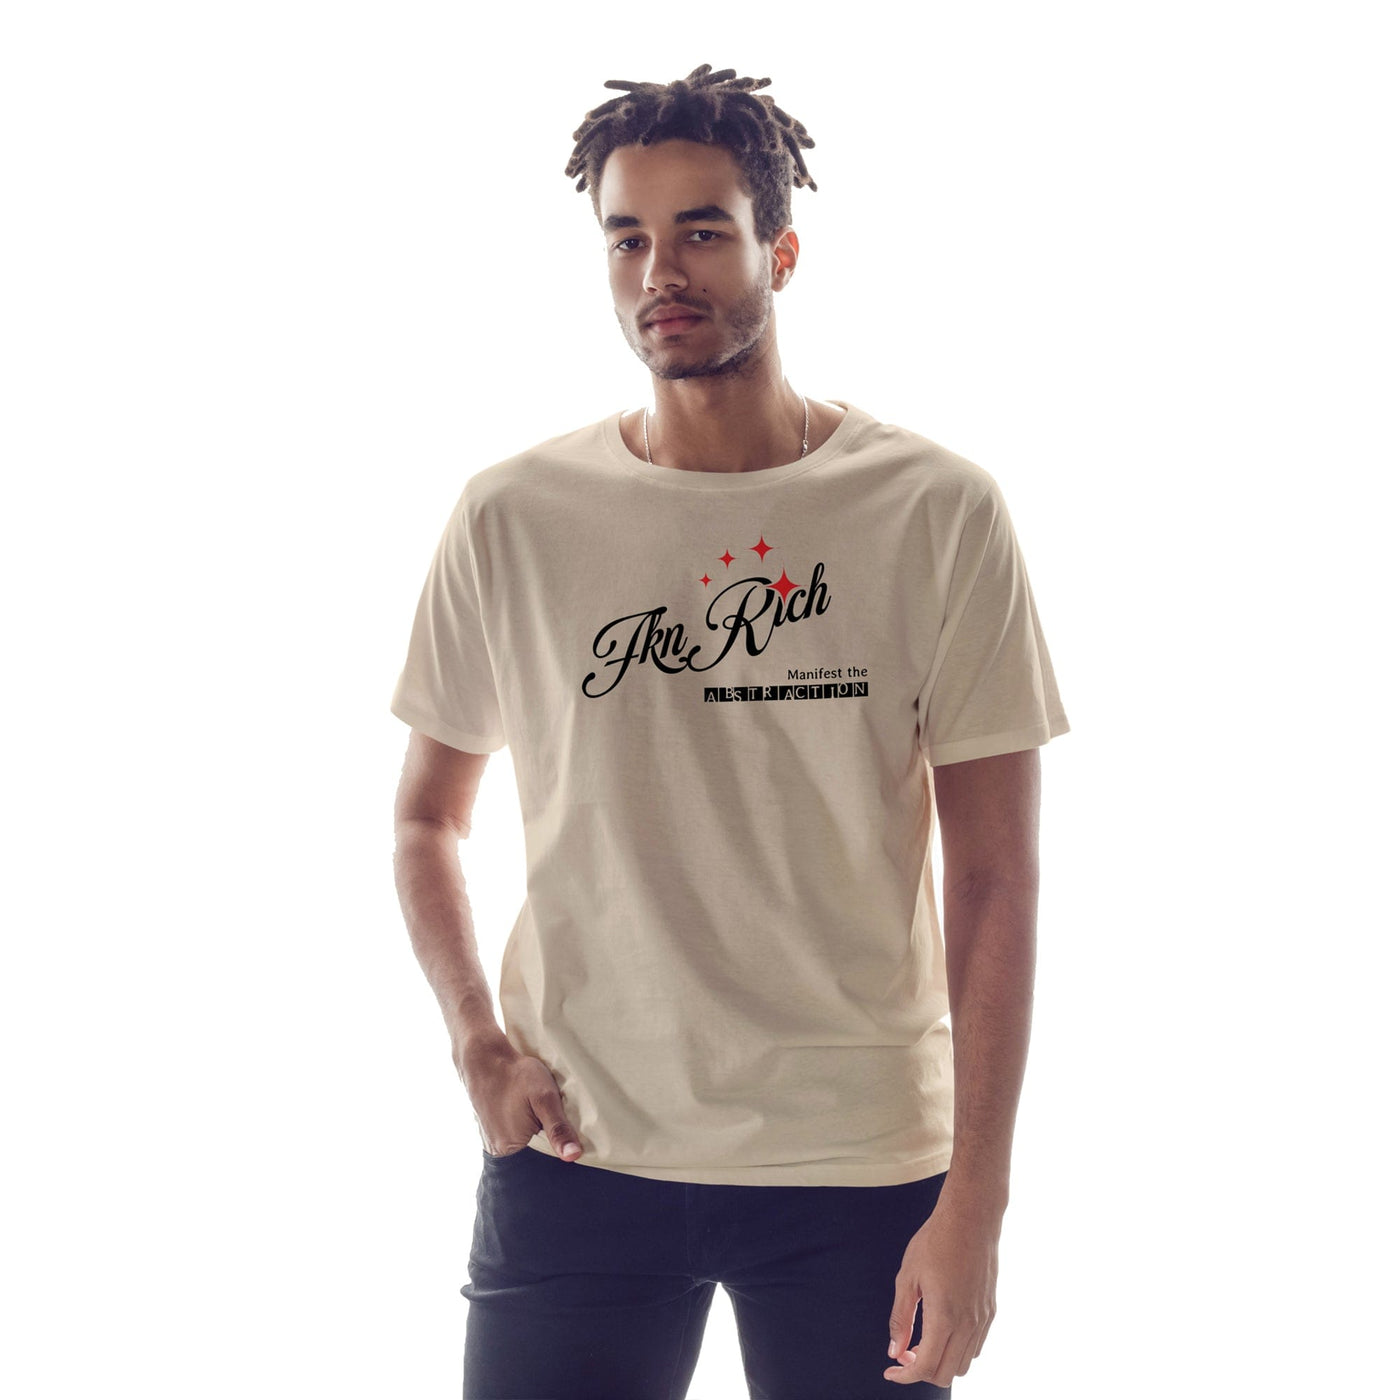 Abstract Tee - FKN Rich